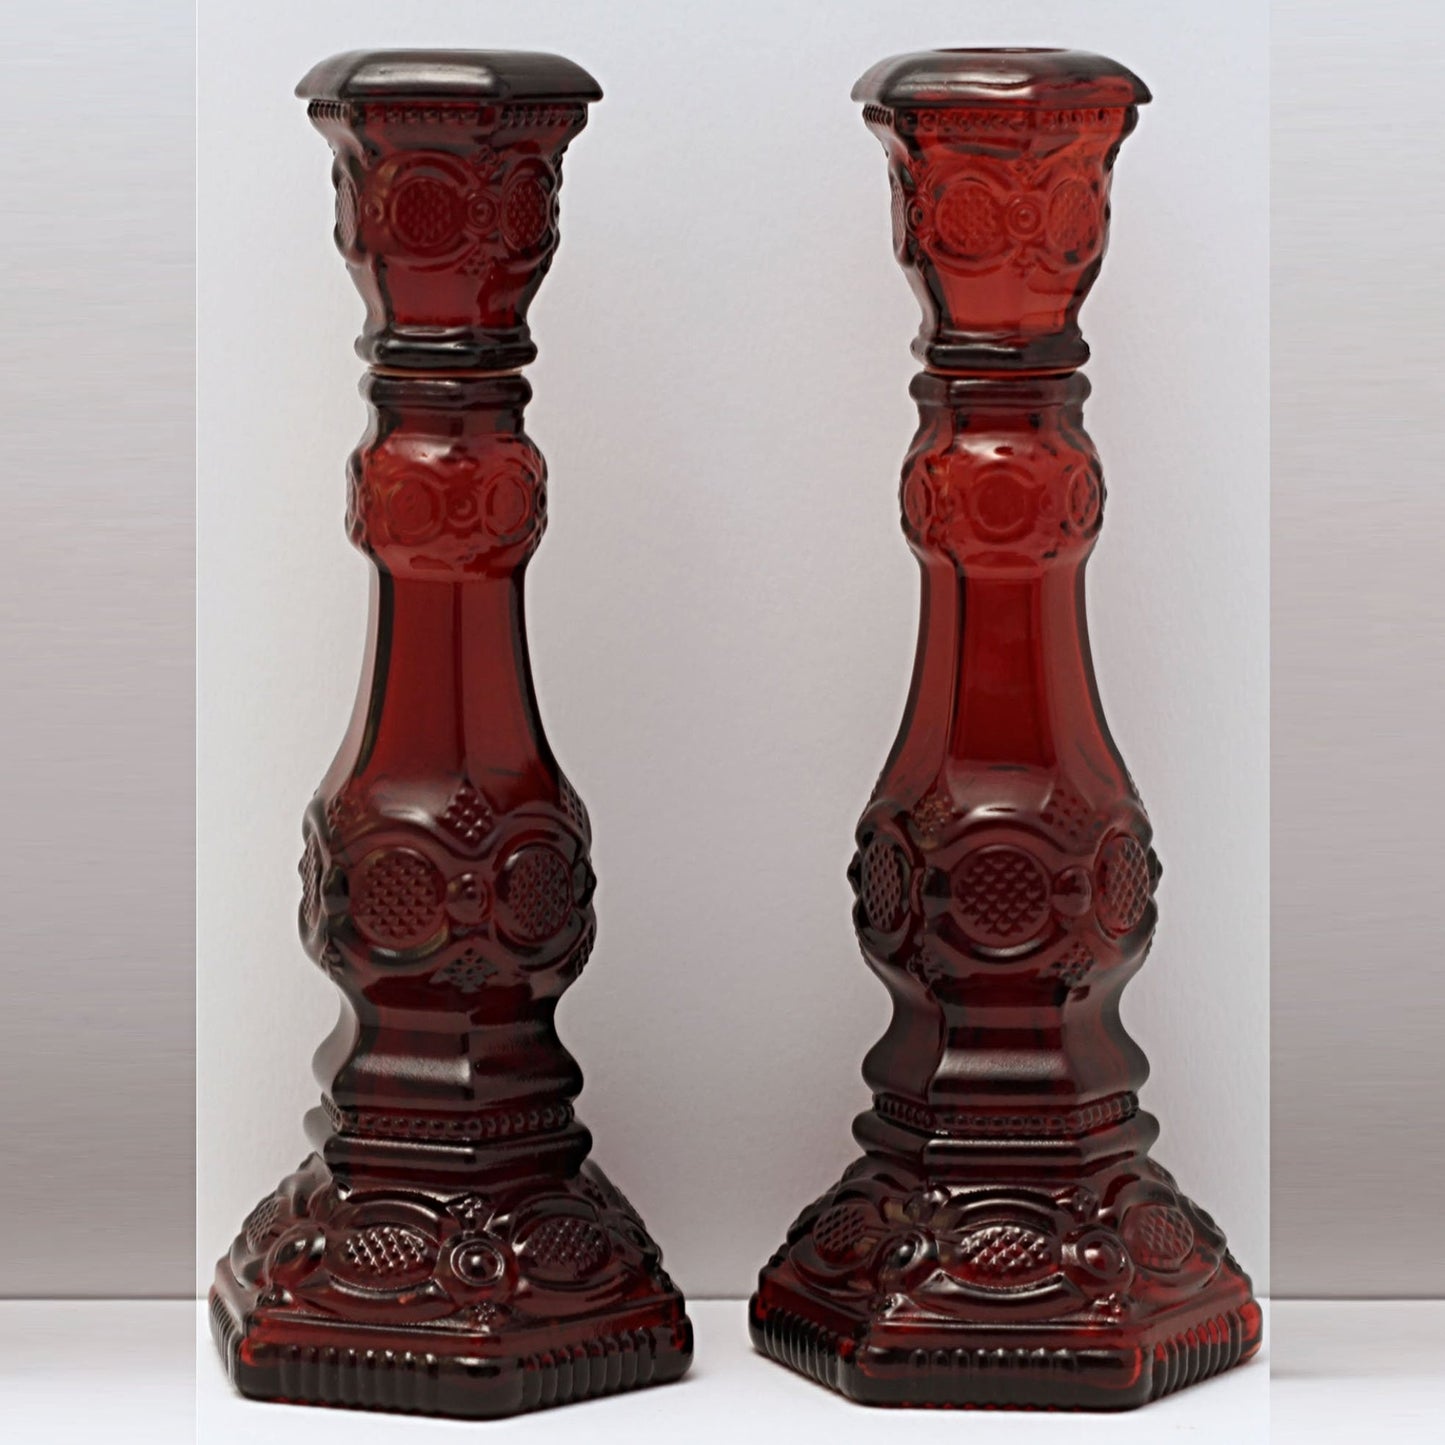 CAPE COD 1876 COLLECTION By Avon Set of Two Tall Candlesticks